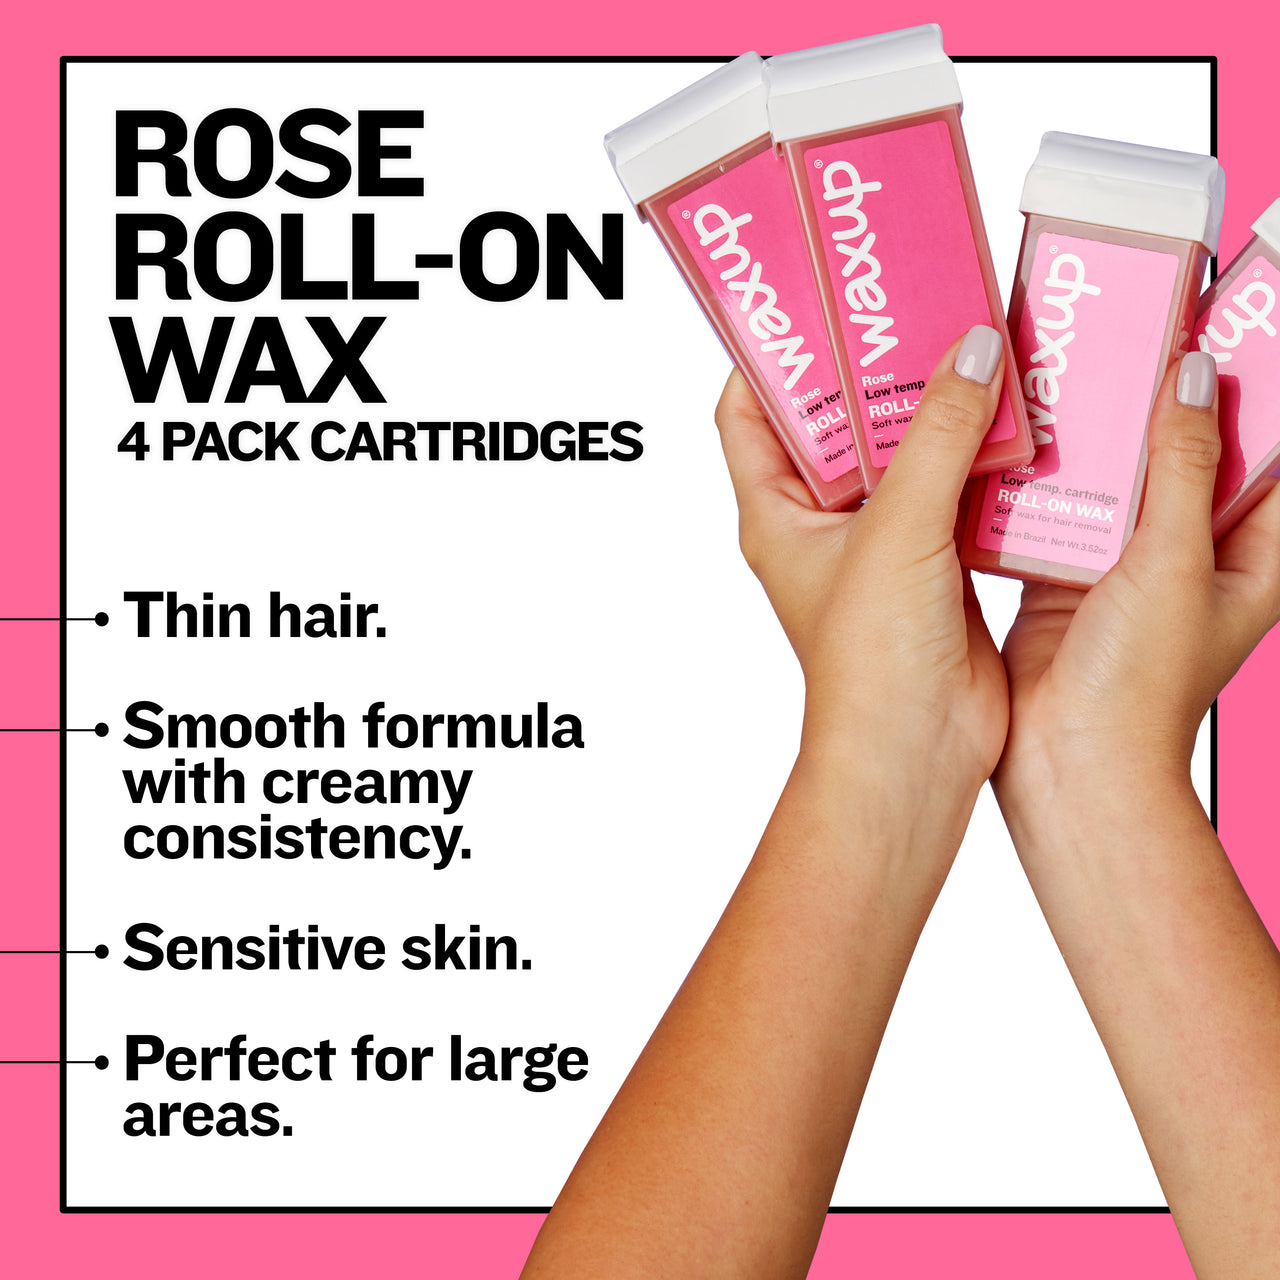 Rose Roll On Wax Cartridges 4 Pack - thatswaxup -  - Roll On Wax - waxup hair removal wax body waxing kit women and men professional waxing supplies